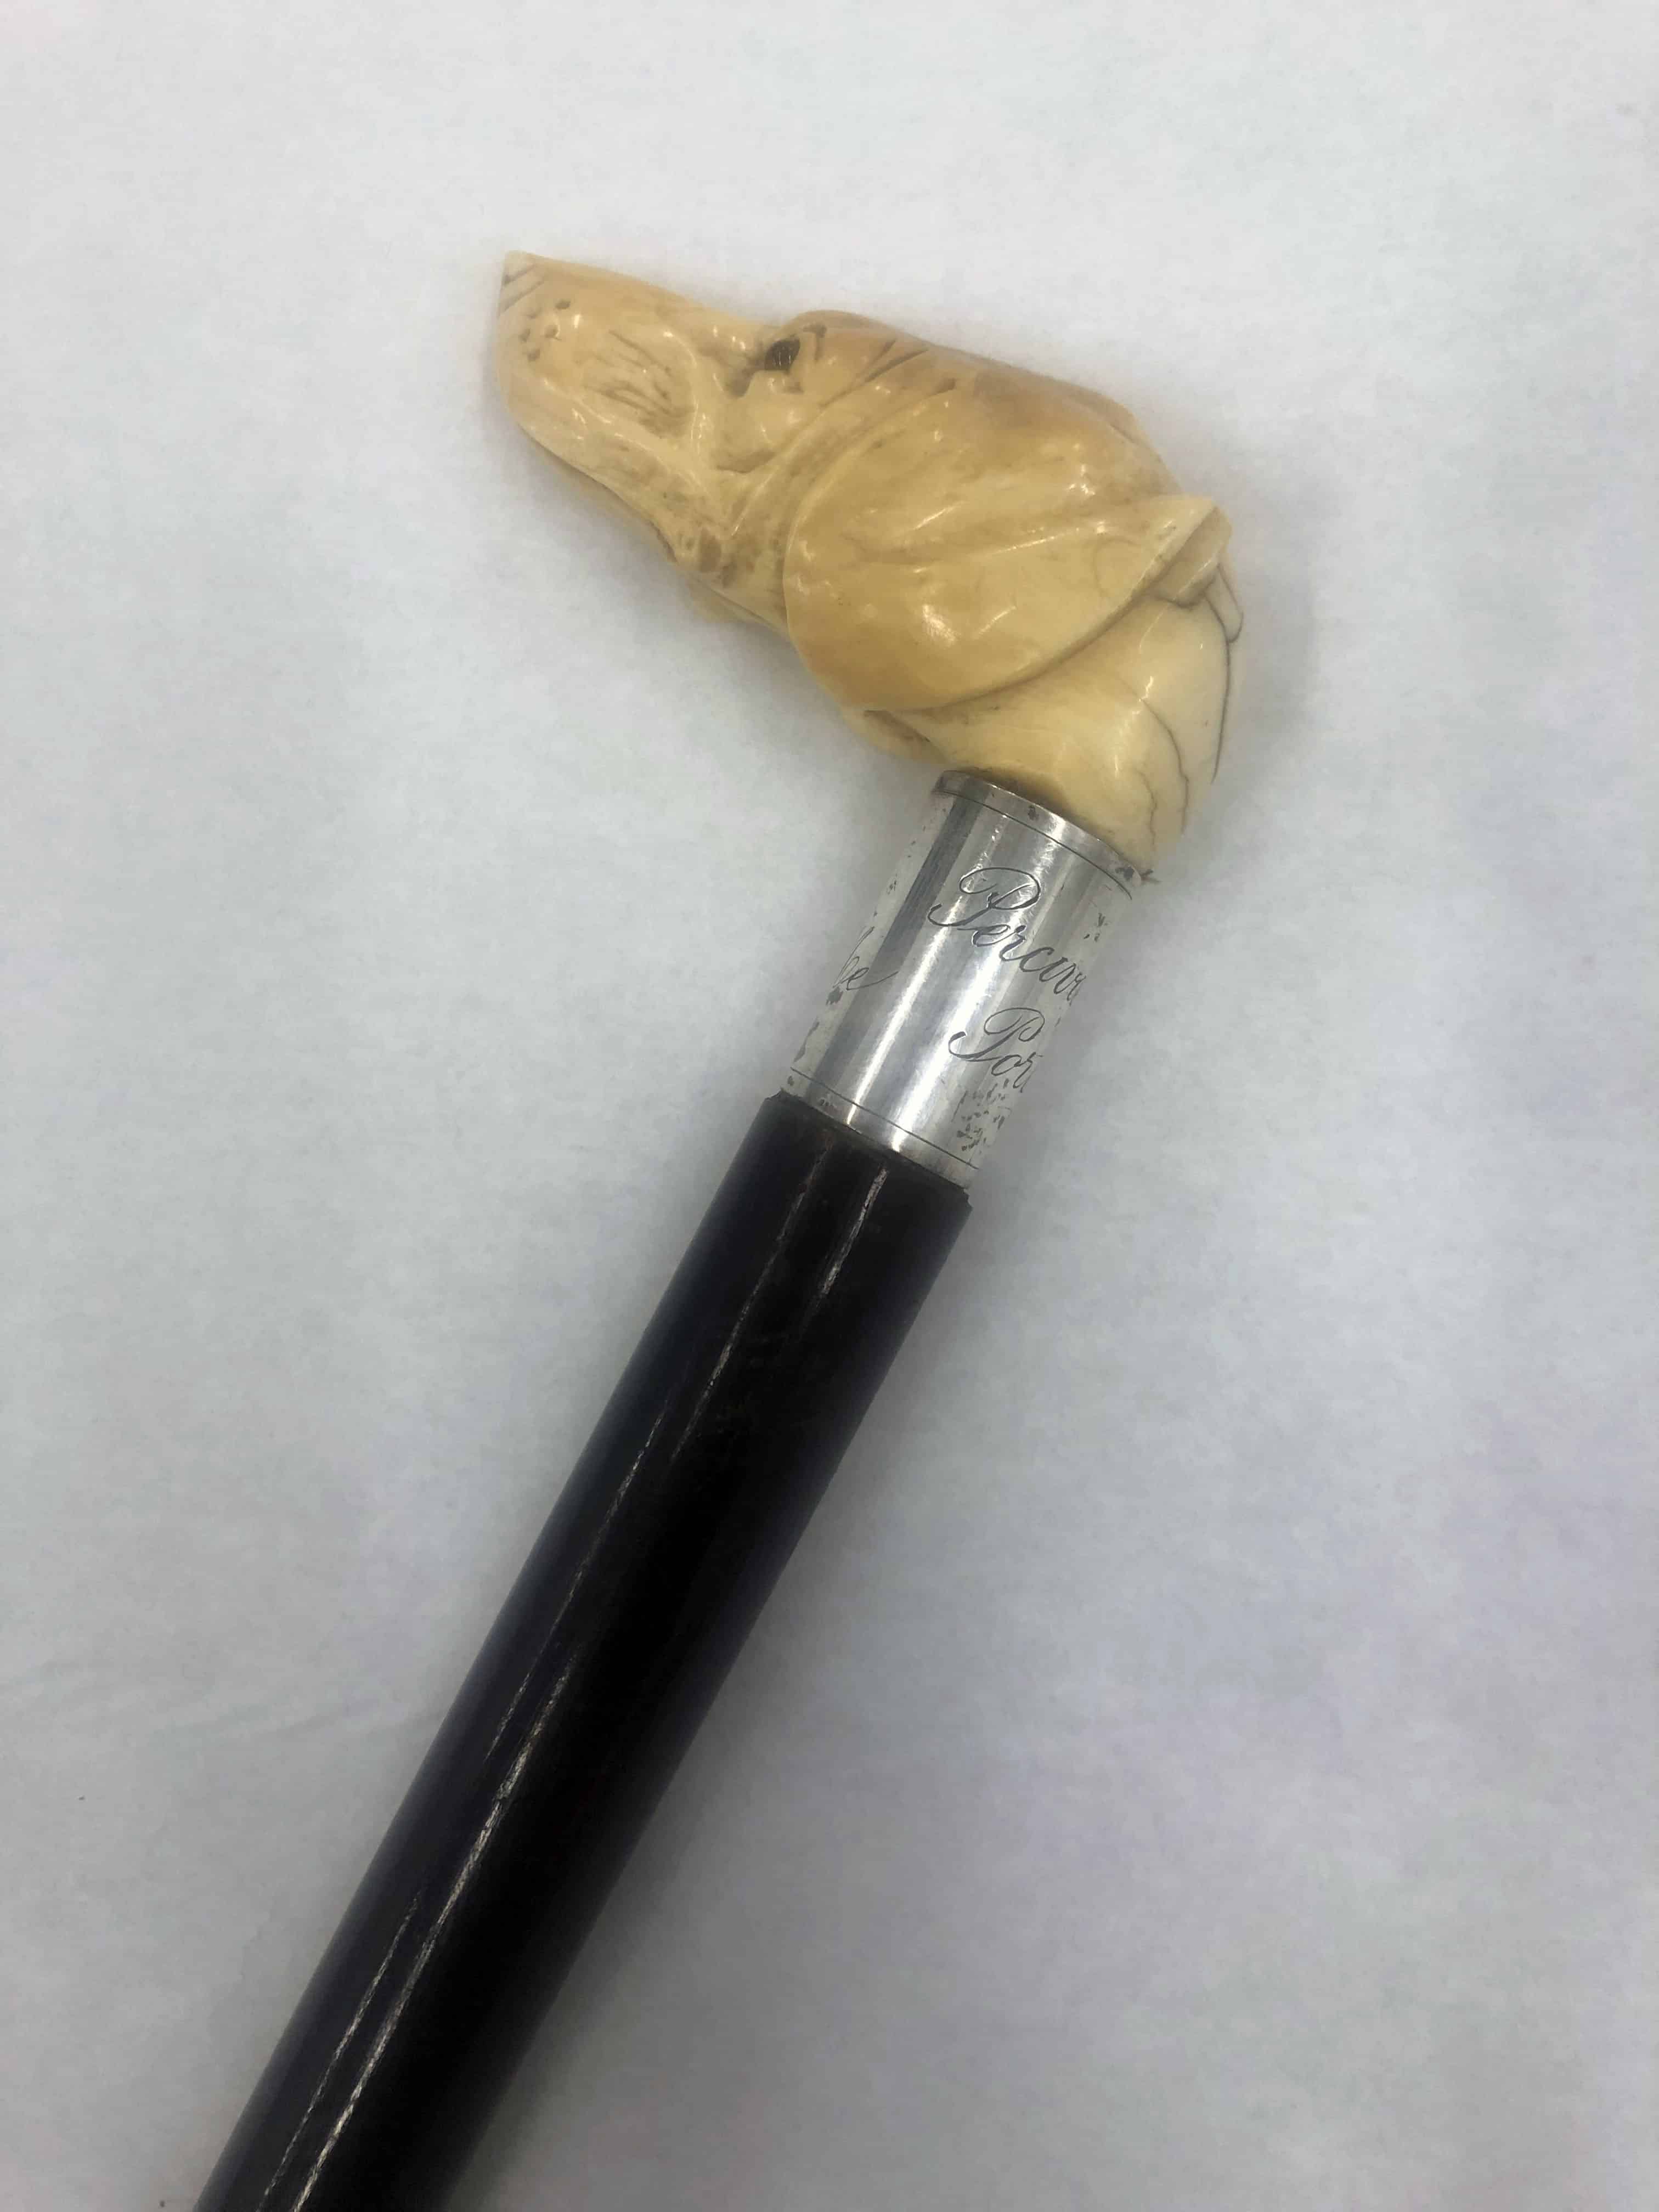 Photograph of a walking cane with a handle in the shape of a carved dog's head.